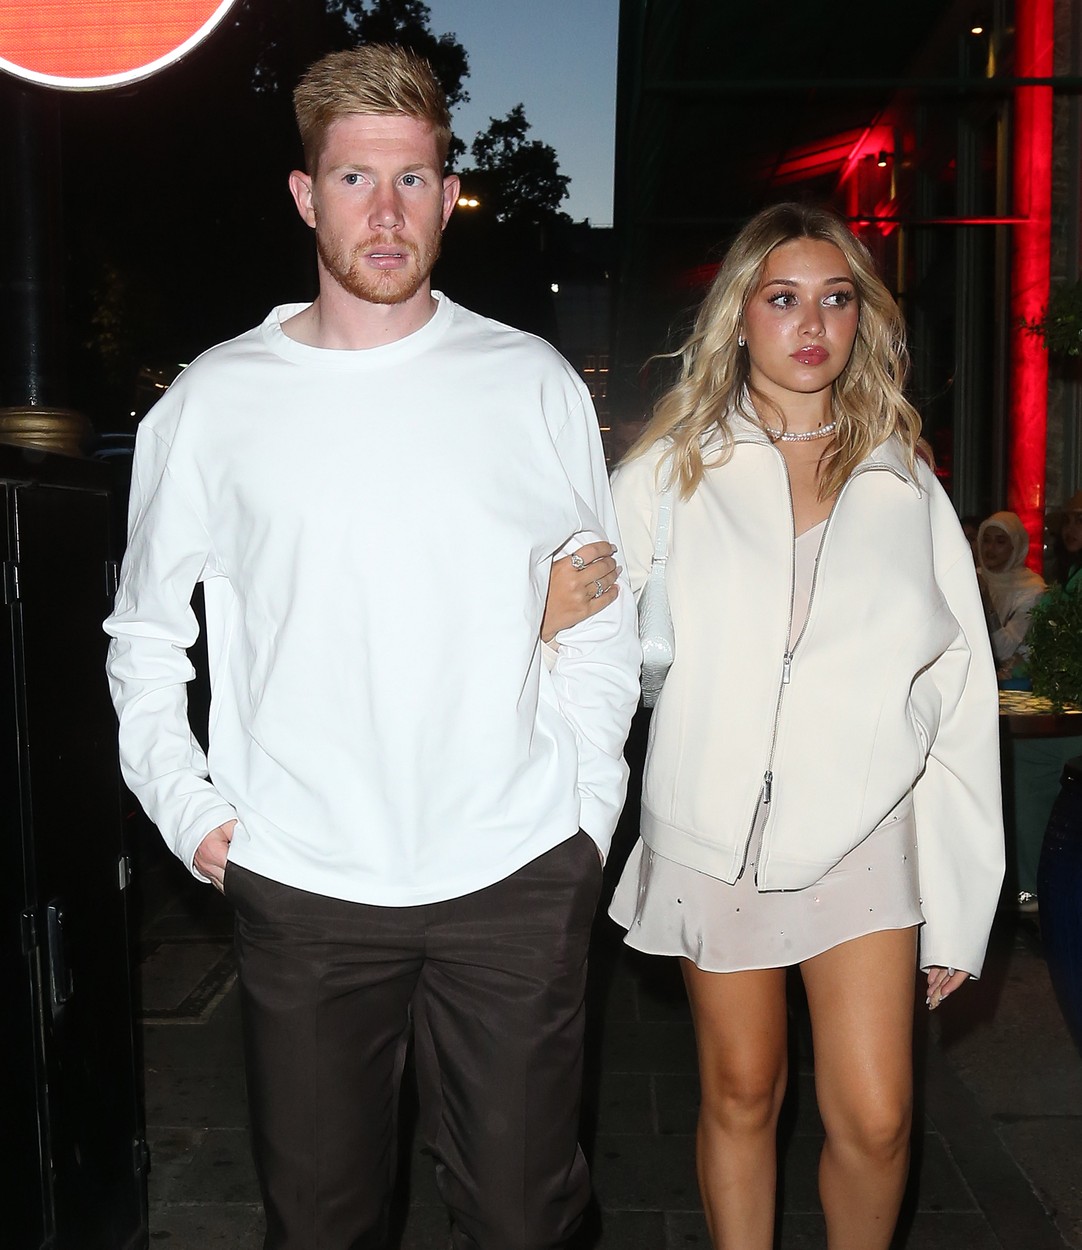 EXCLUSIVE: Belgium & Manchester City star footballer Kevin De Bruyne seen here with his wife Michele Lacroix on a romantic night out at Mayfair restaurant Sexy Fish In London.
31 Jul 2022,Image: 711106750, License: Rights-managed, Restrictions: World Rights, Model Release: no, Pictured: Kevin De Bruyne,  Michele Lacroix